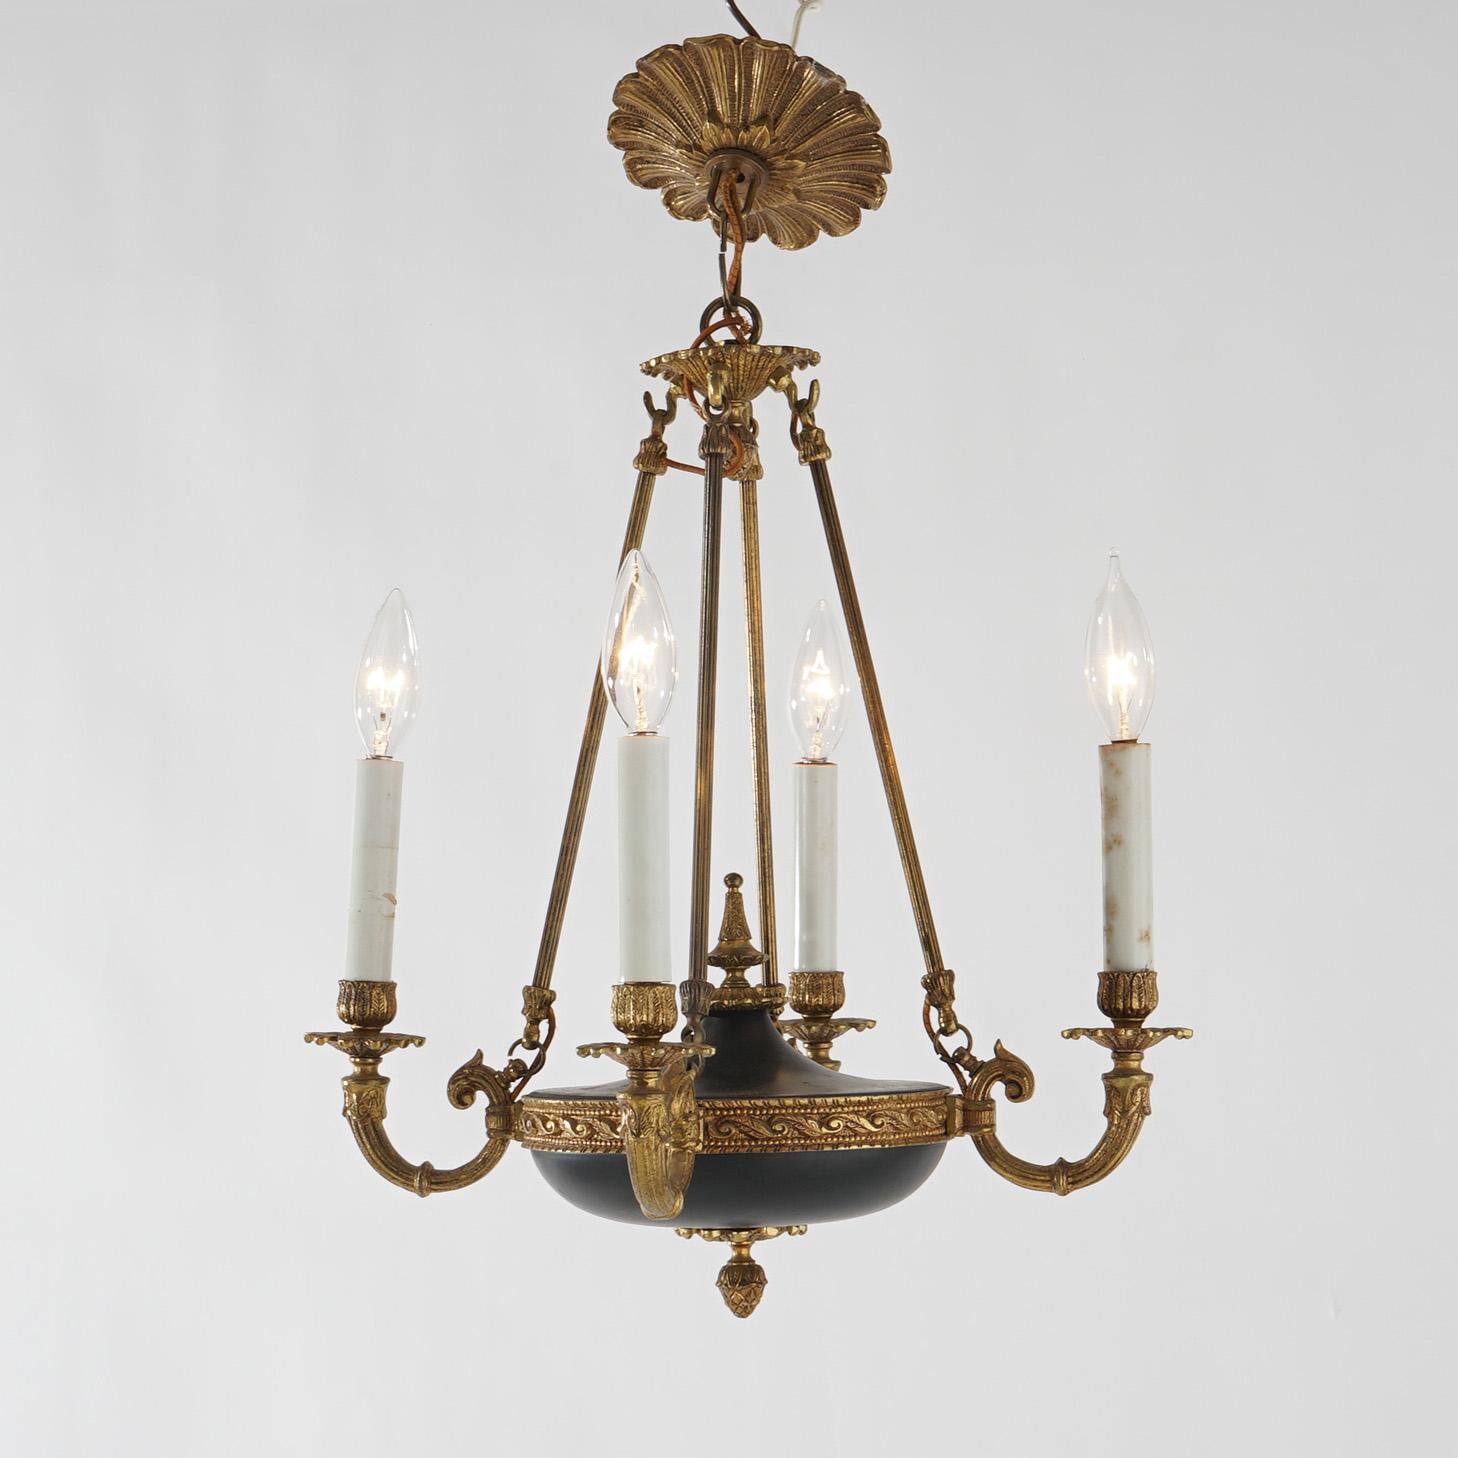 American French Empire Ebonized & Gilt Metal Four-Light Pan Chandelier 20th C For Sale